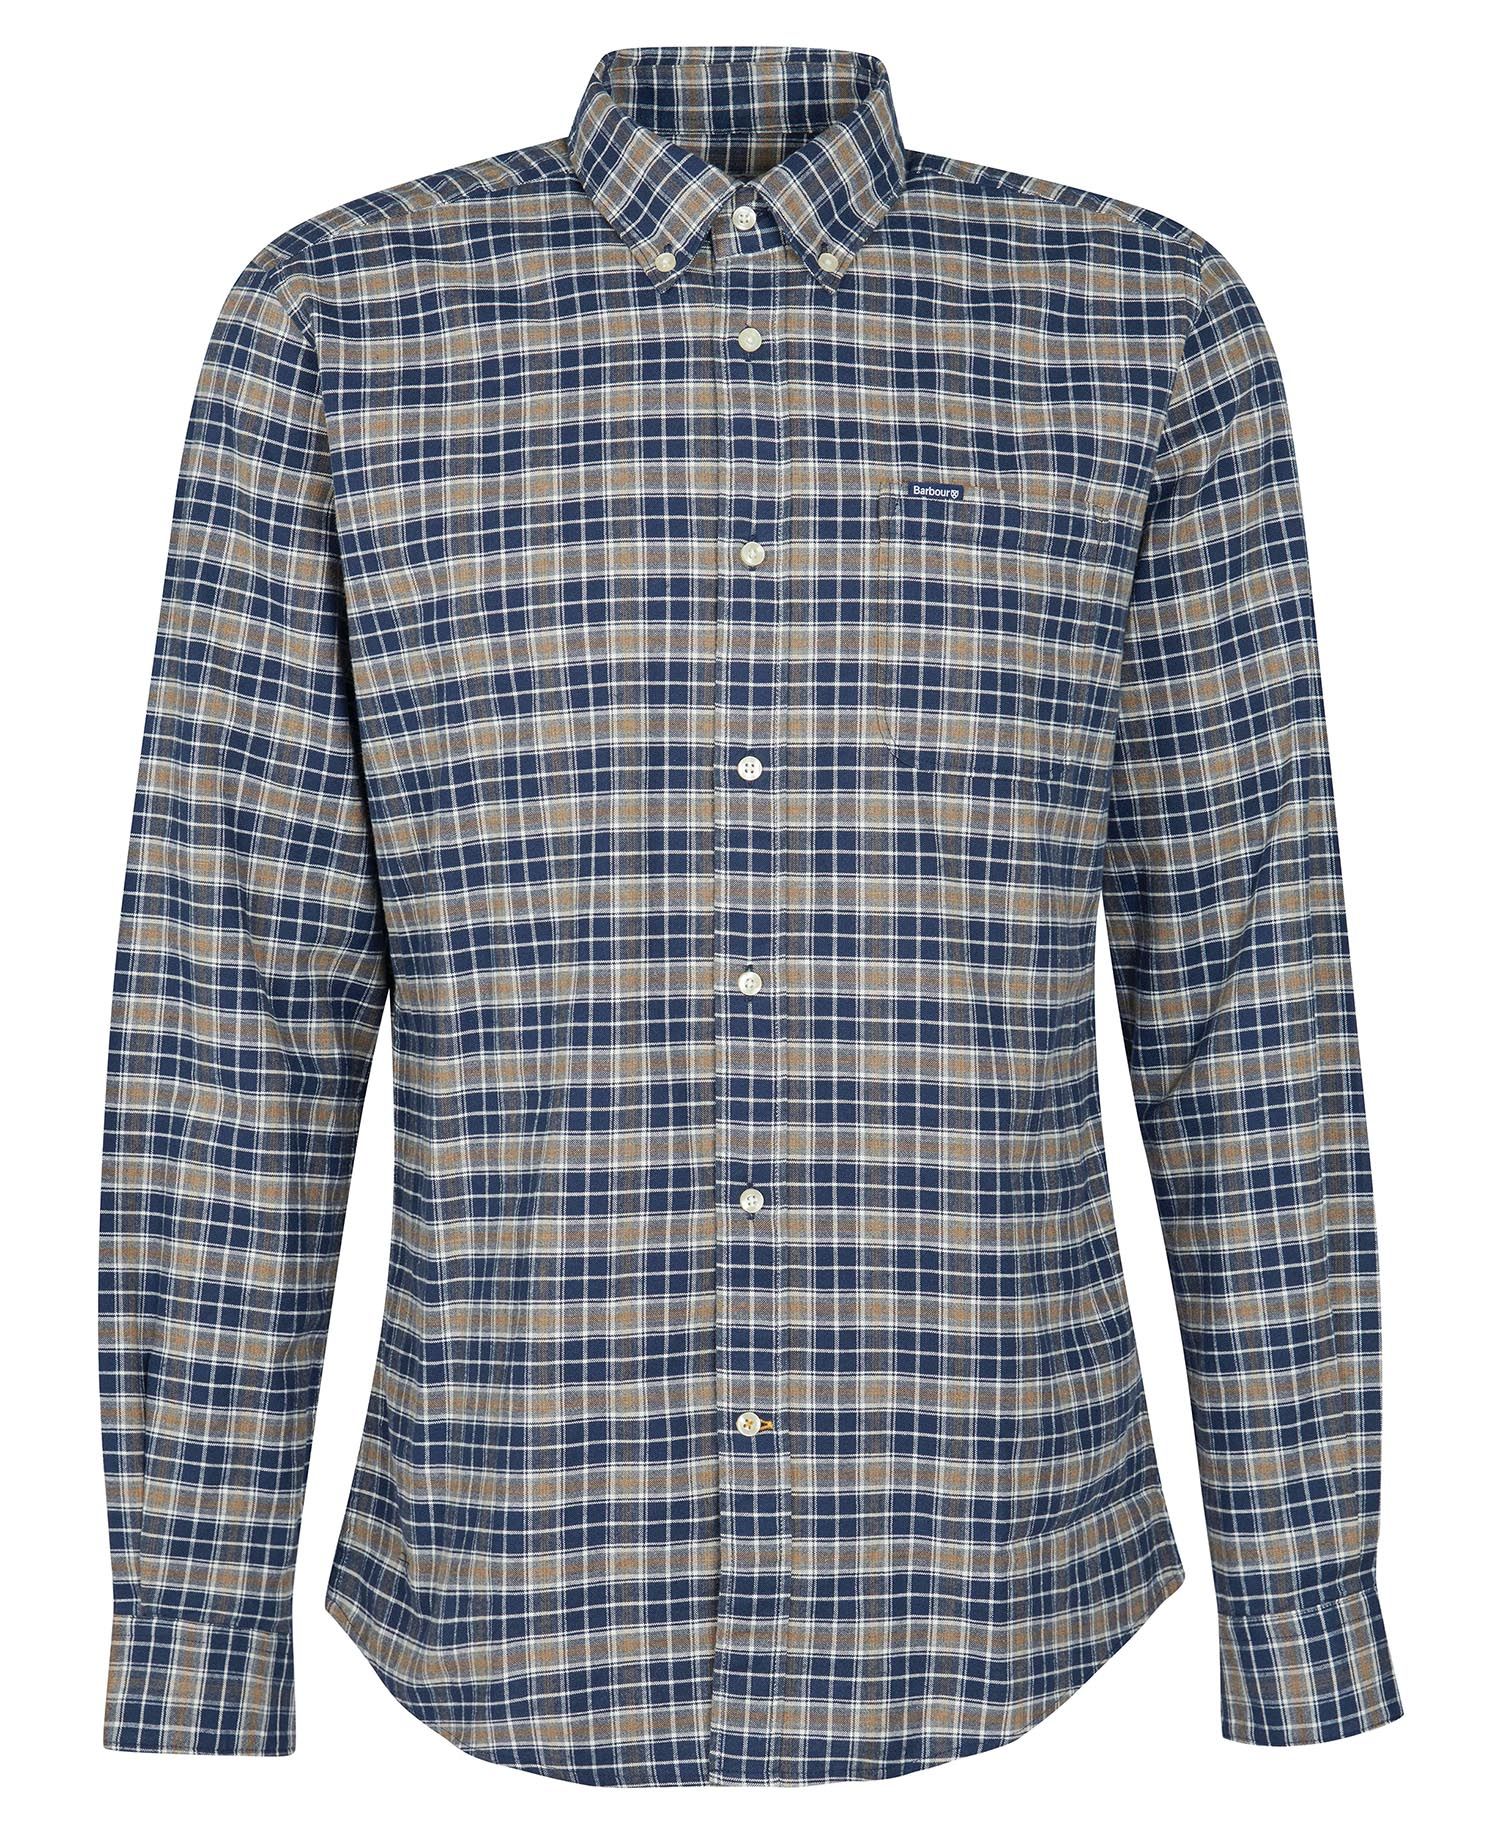 Barbour - Benwell Tailored Fit Shirt - Navy